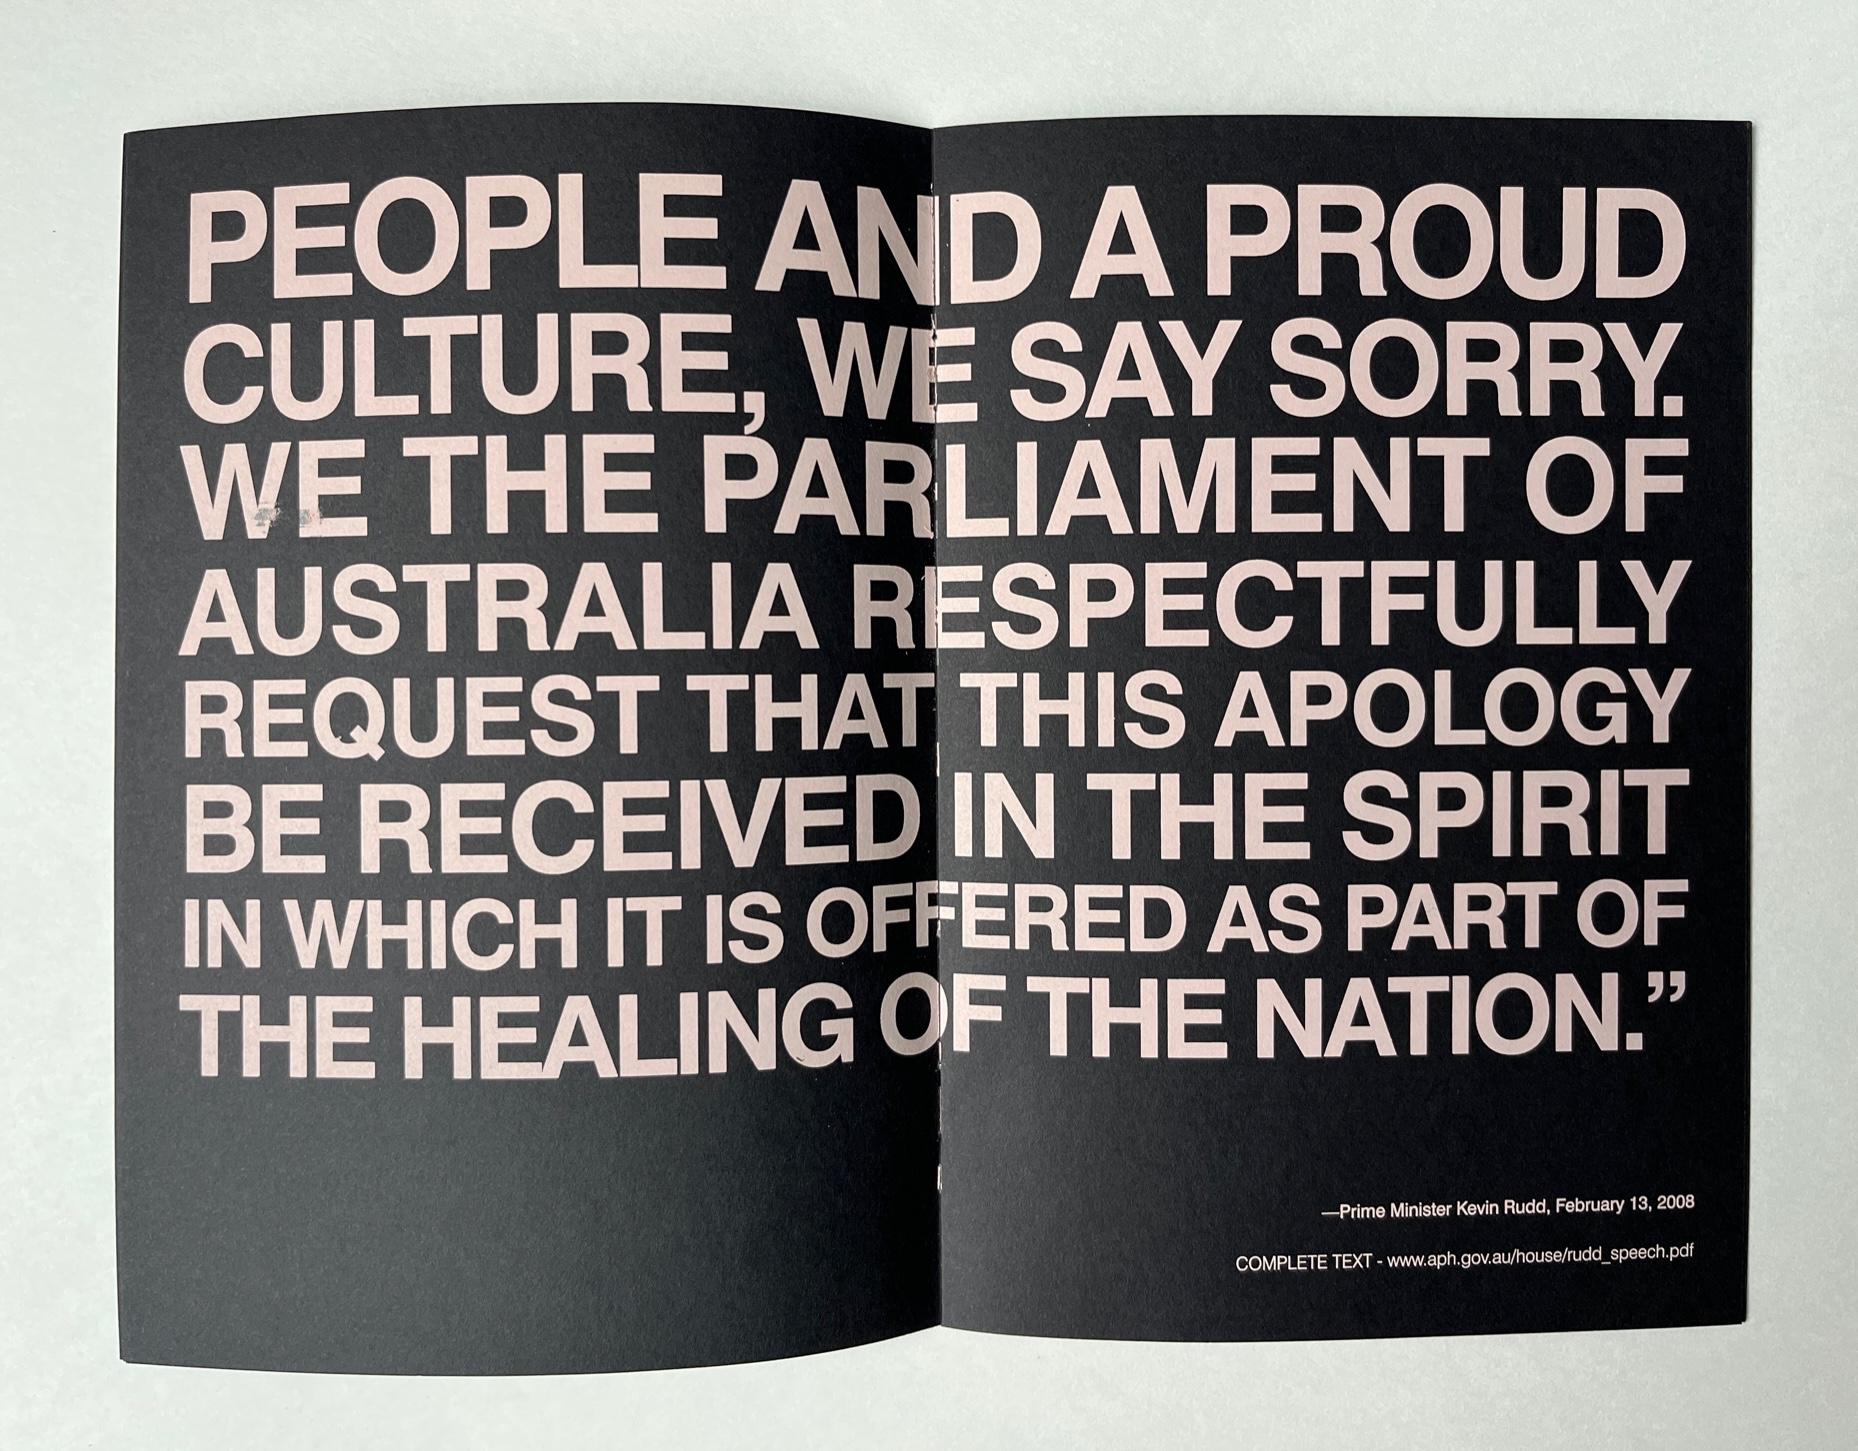 WE ARE SORRY, Artists & Activists 10, Printed Matter, NY + The Truth and Reconciliation of Canada, 2010, 16pp